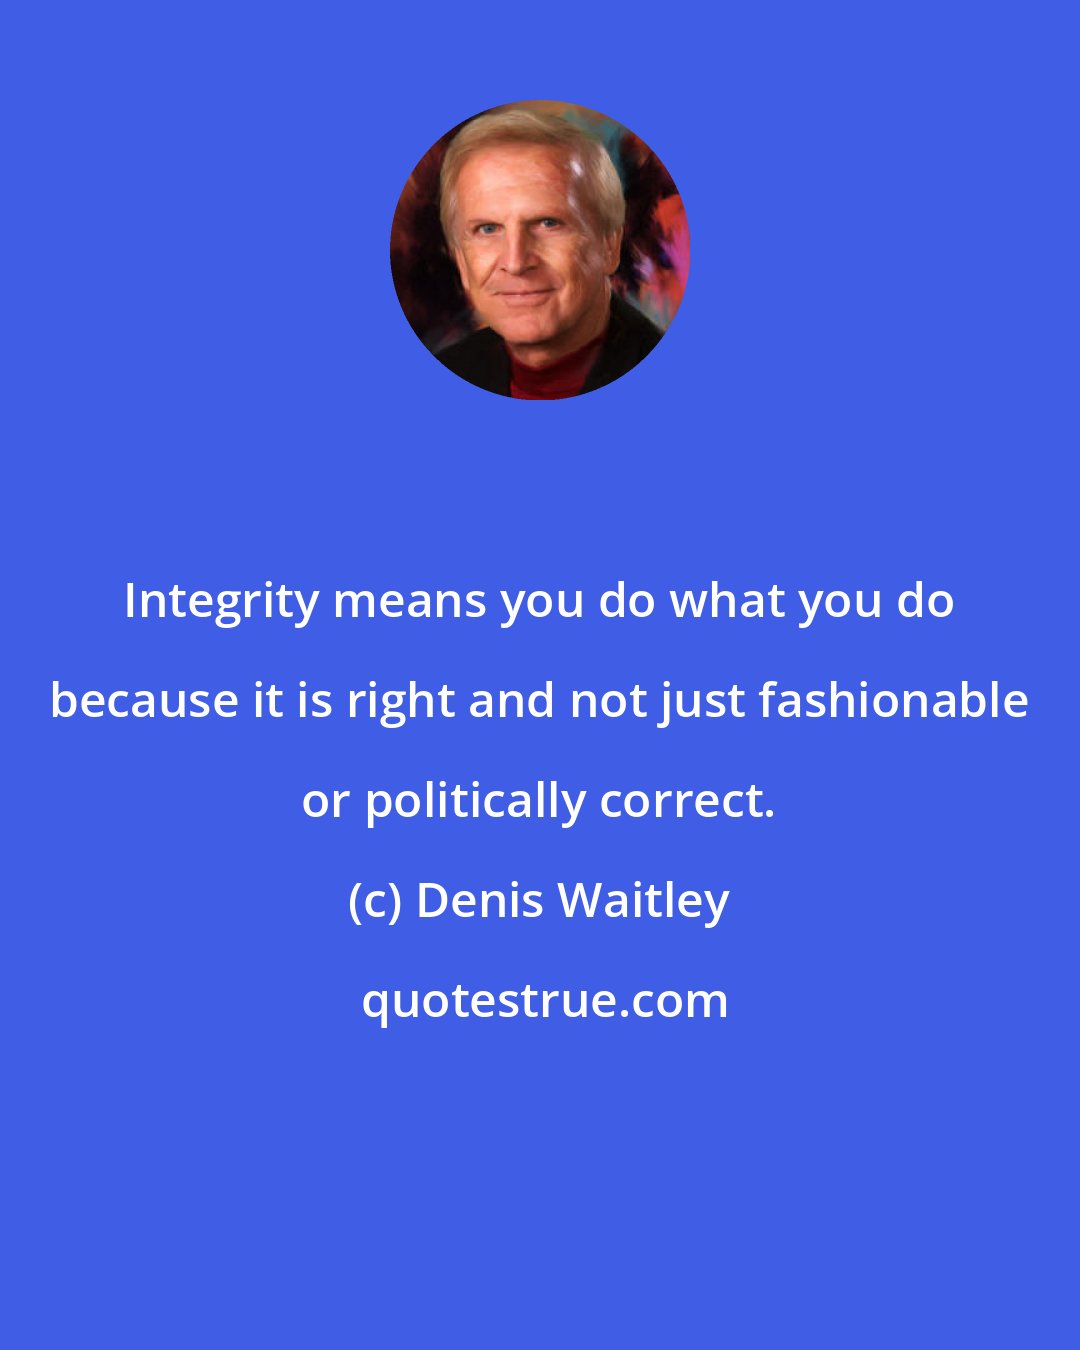 Denis Waitley: Integrity means you do what you do because it is right and not just fashionable or politically correct.